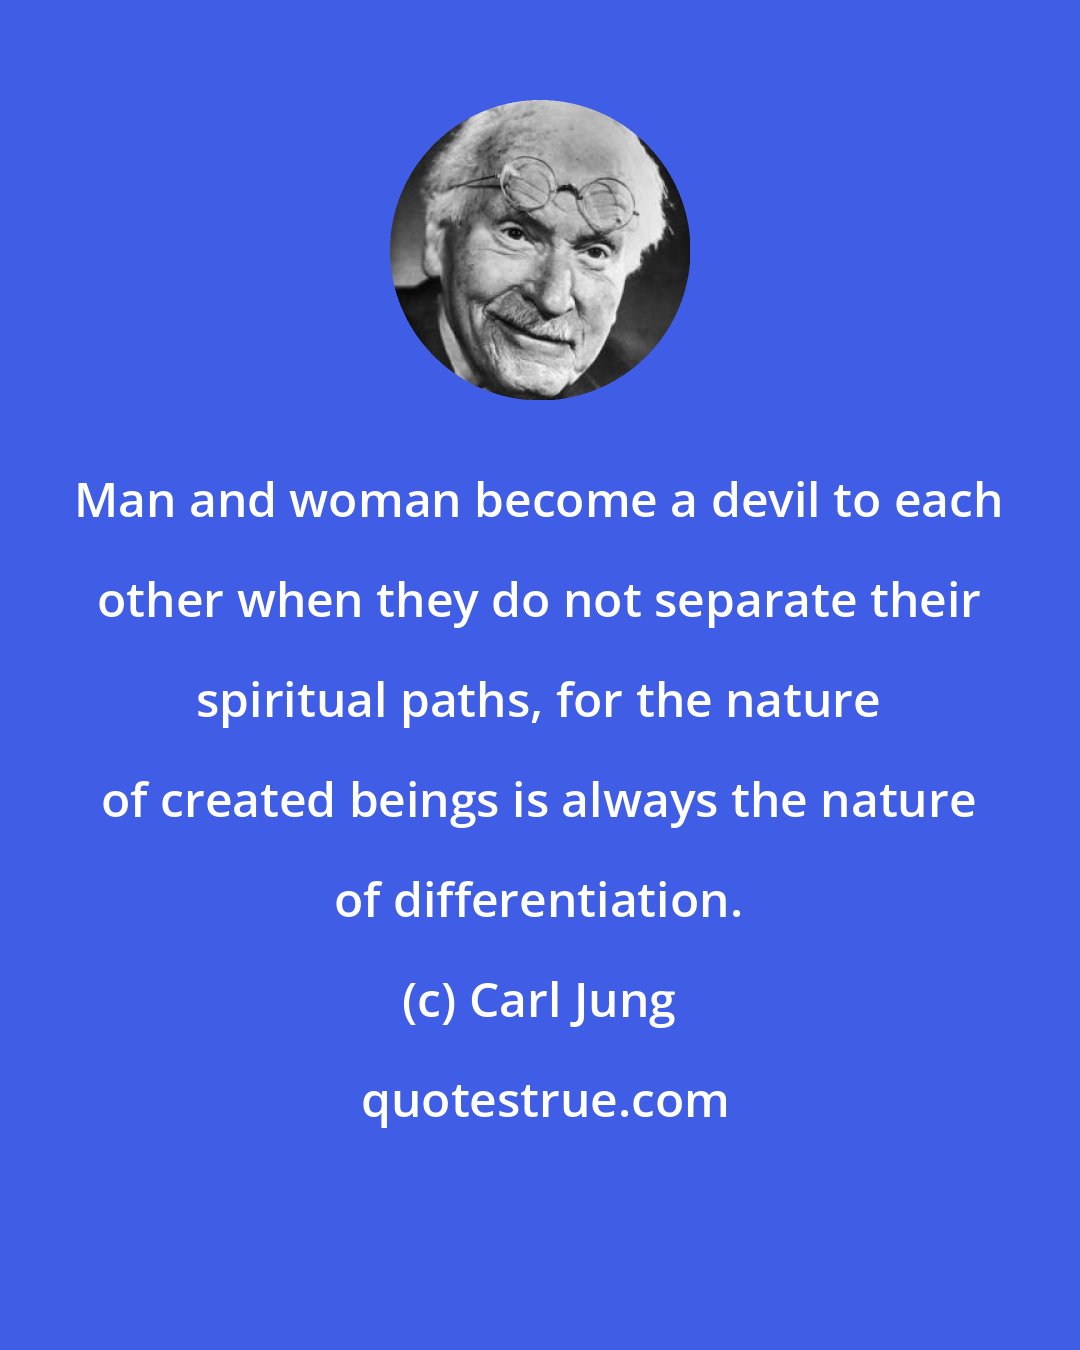 Carl Jung: Man and woman become a devil to each other when they do not separate their spiritual paths, for the nature of created beings is always the nature of differentiation.